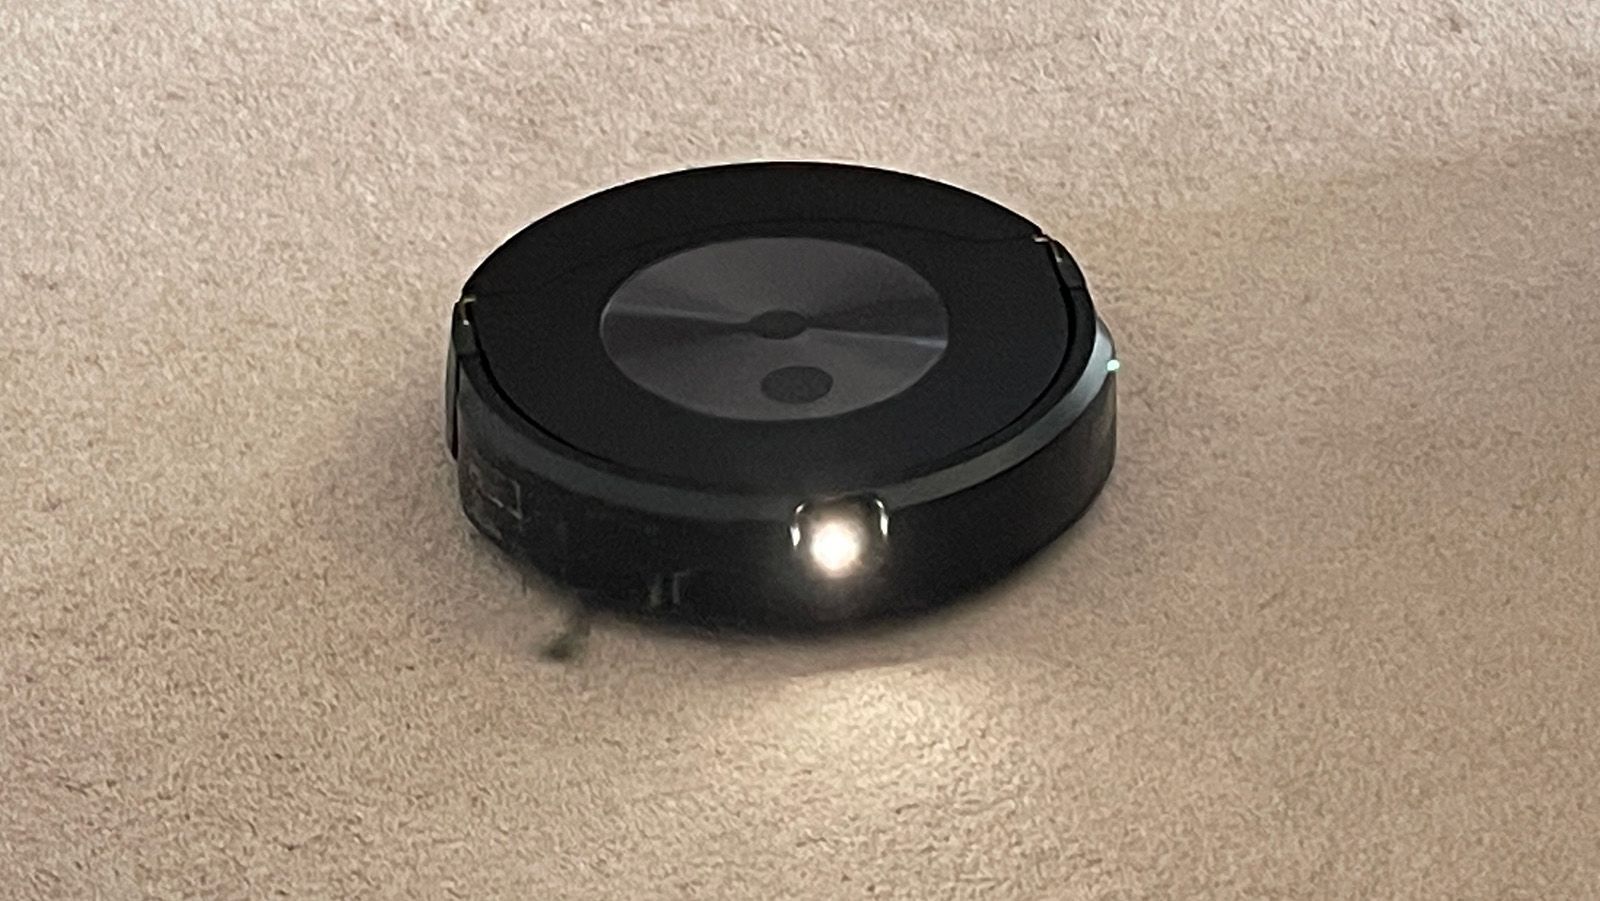 Roomba j7+ Review: Does It Work? - Paw of Approval - The Dodo